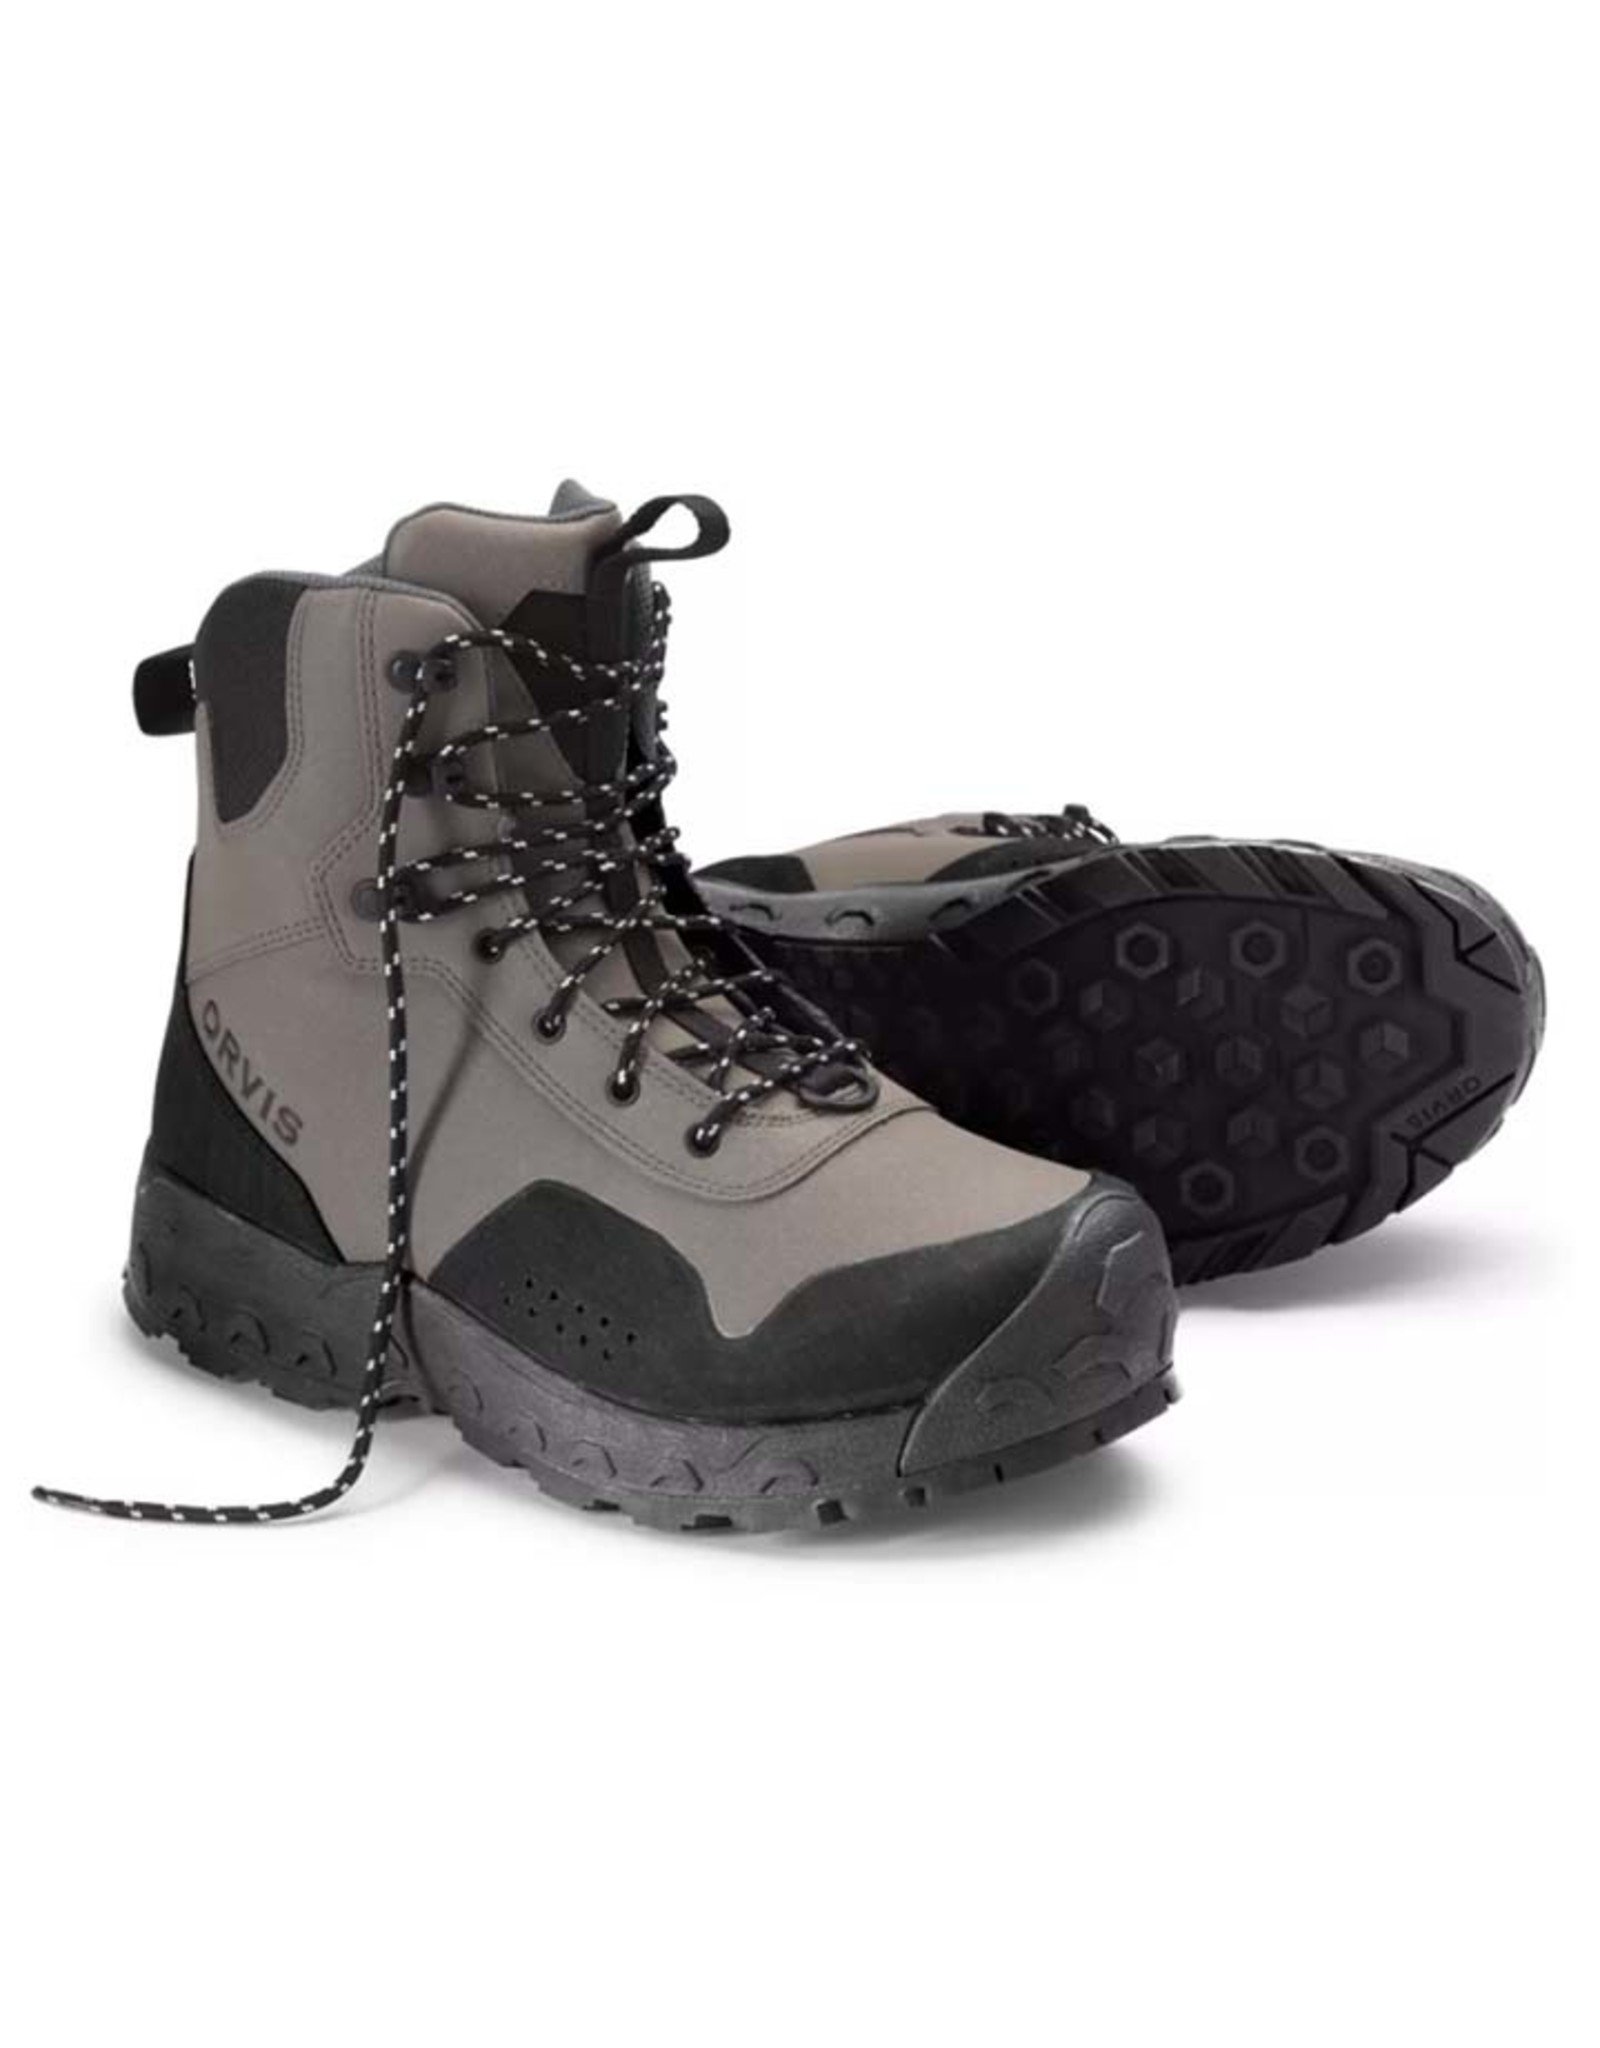 Orvis Orvis Clearwater Wading Boots Rubber